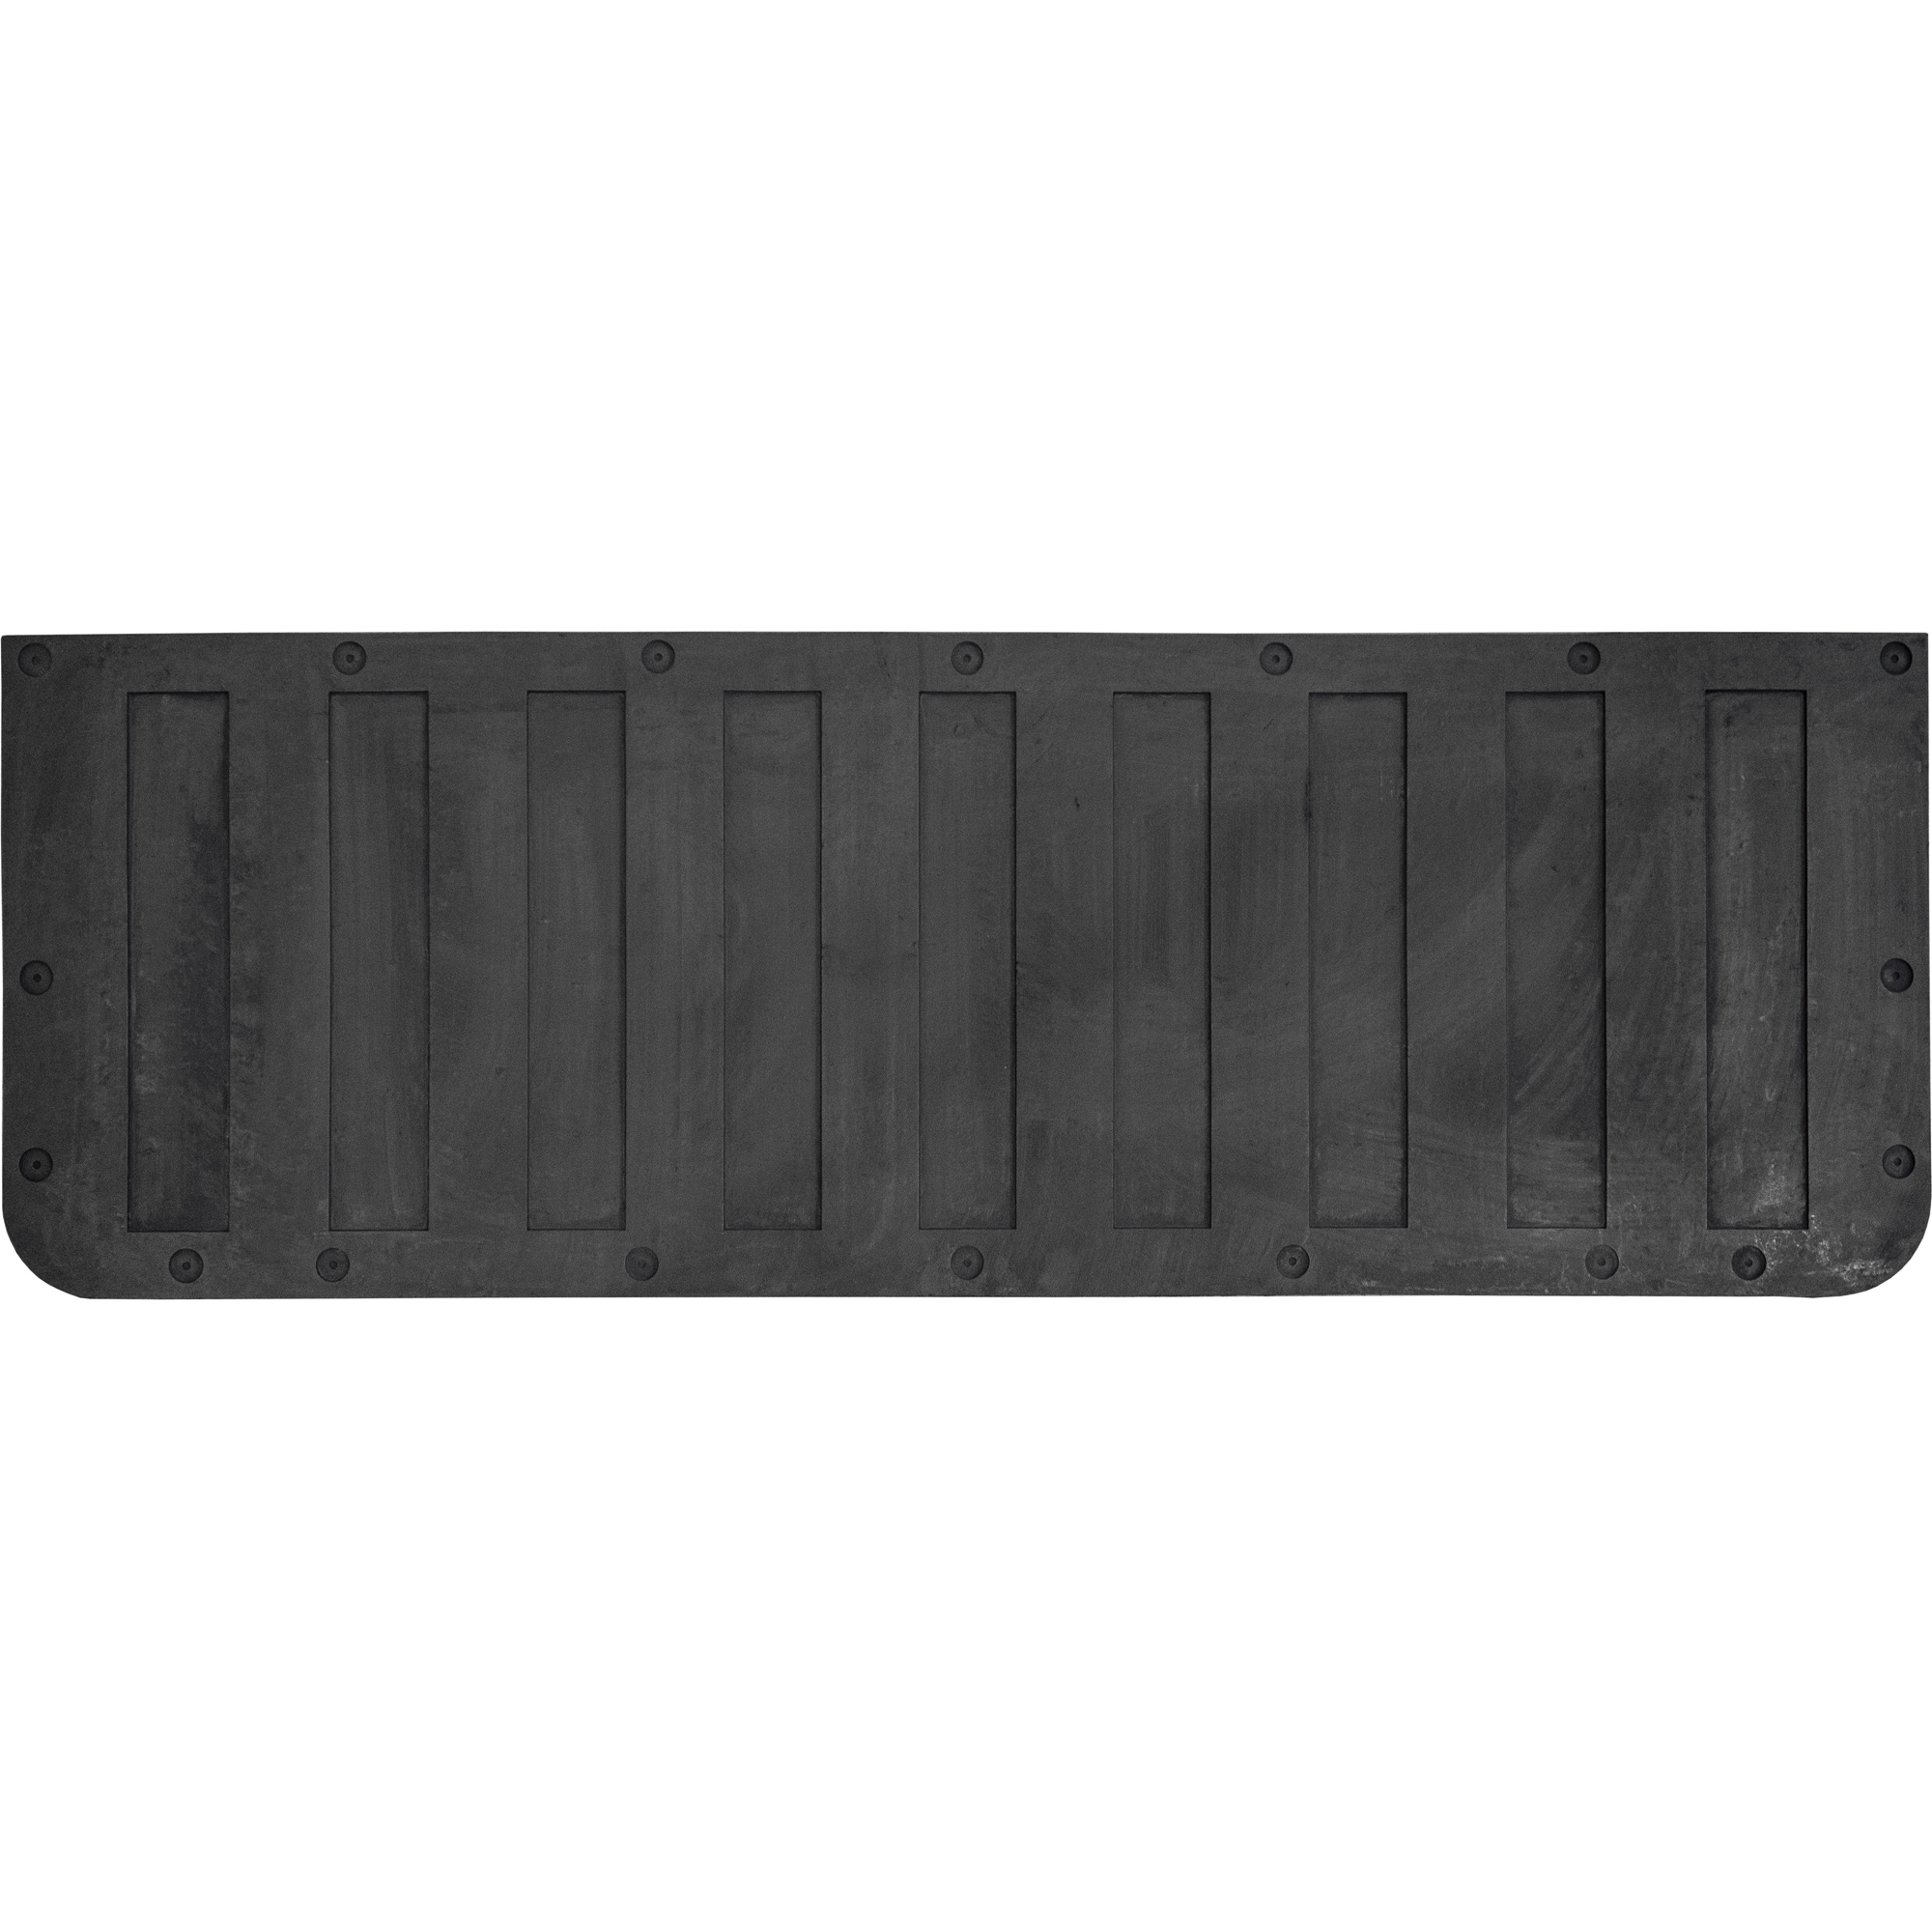 Boomerang Rubber, Chevy/GMC 1500-3500 Truck Tailgate Mat, Long/Short Bed, Primary Color Black, Model TM K BAGGED